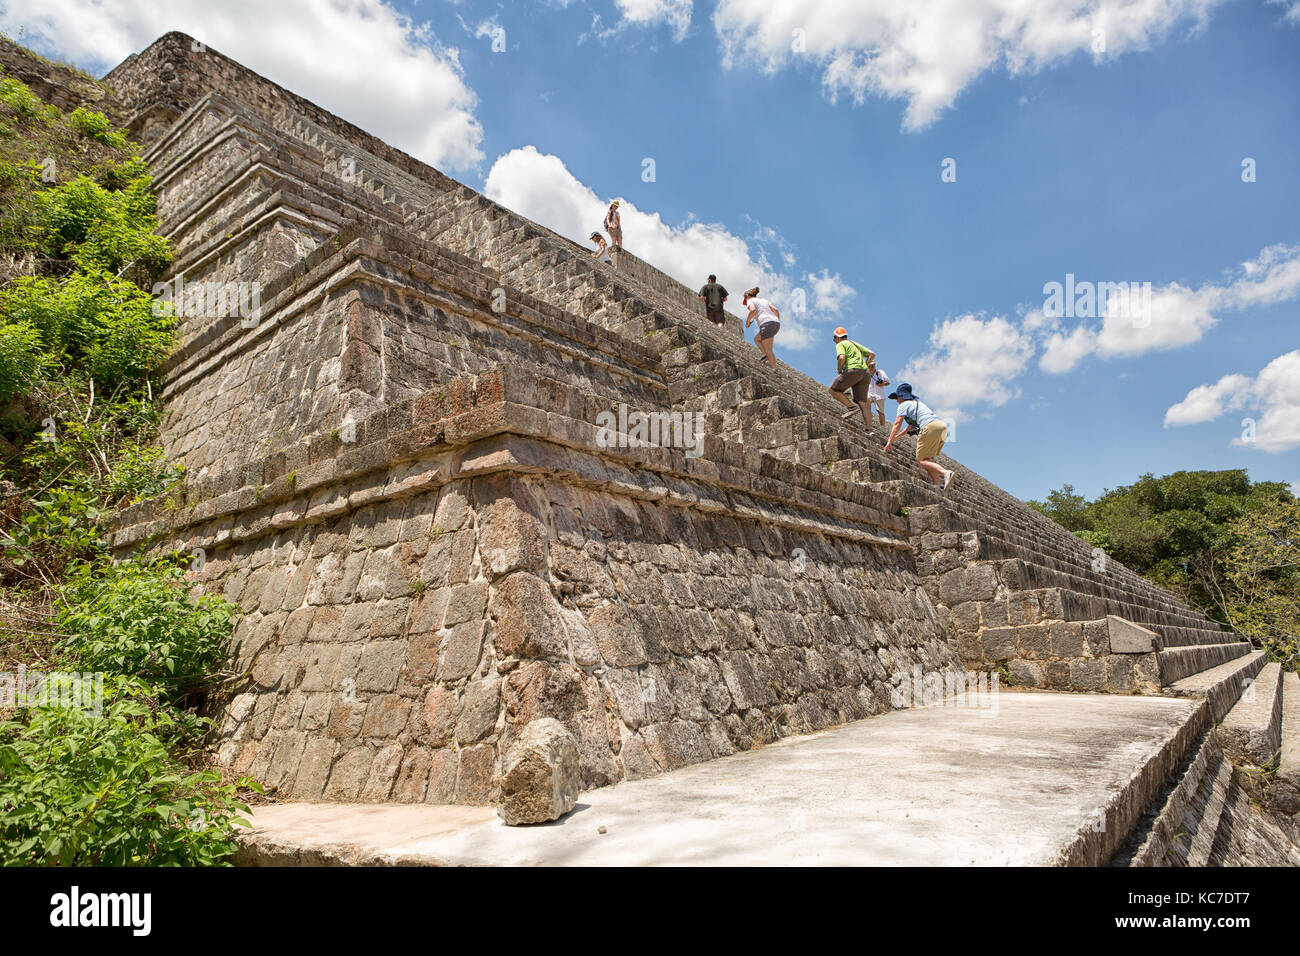 April 23, 2014 Uxmal, Mexico: tourists climb the steep stairs of a pyramid at the UNESCO World Heritage site Stock Photo